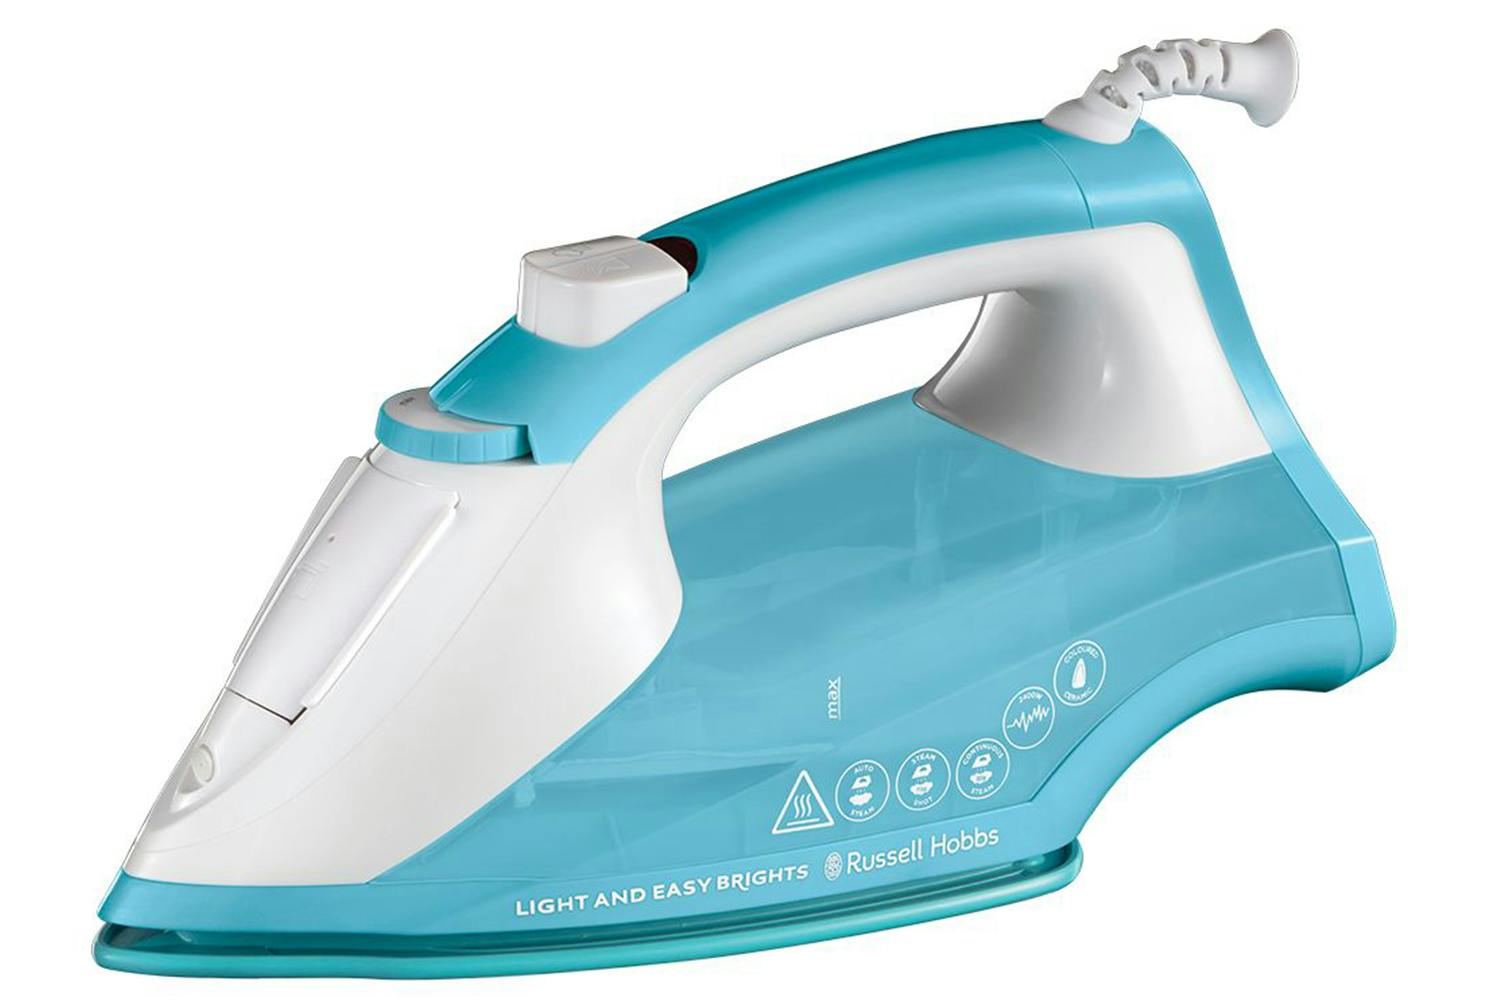 Russell Hobbs 2400W Light and Easy Brights Aqua Iron | 26482